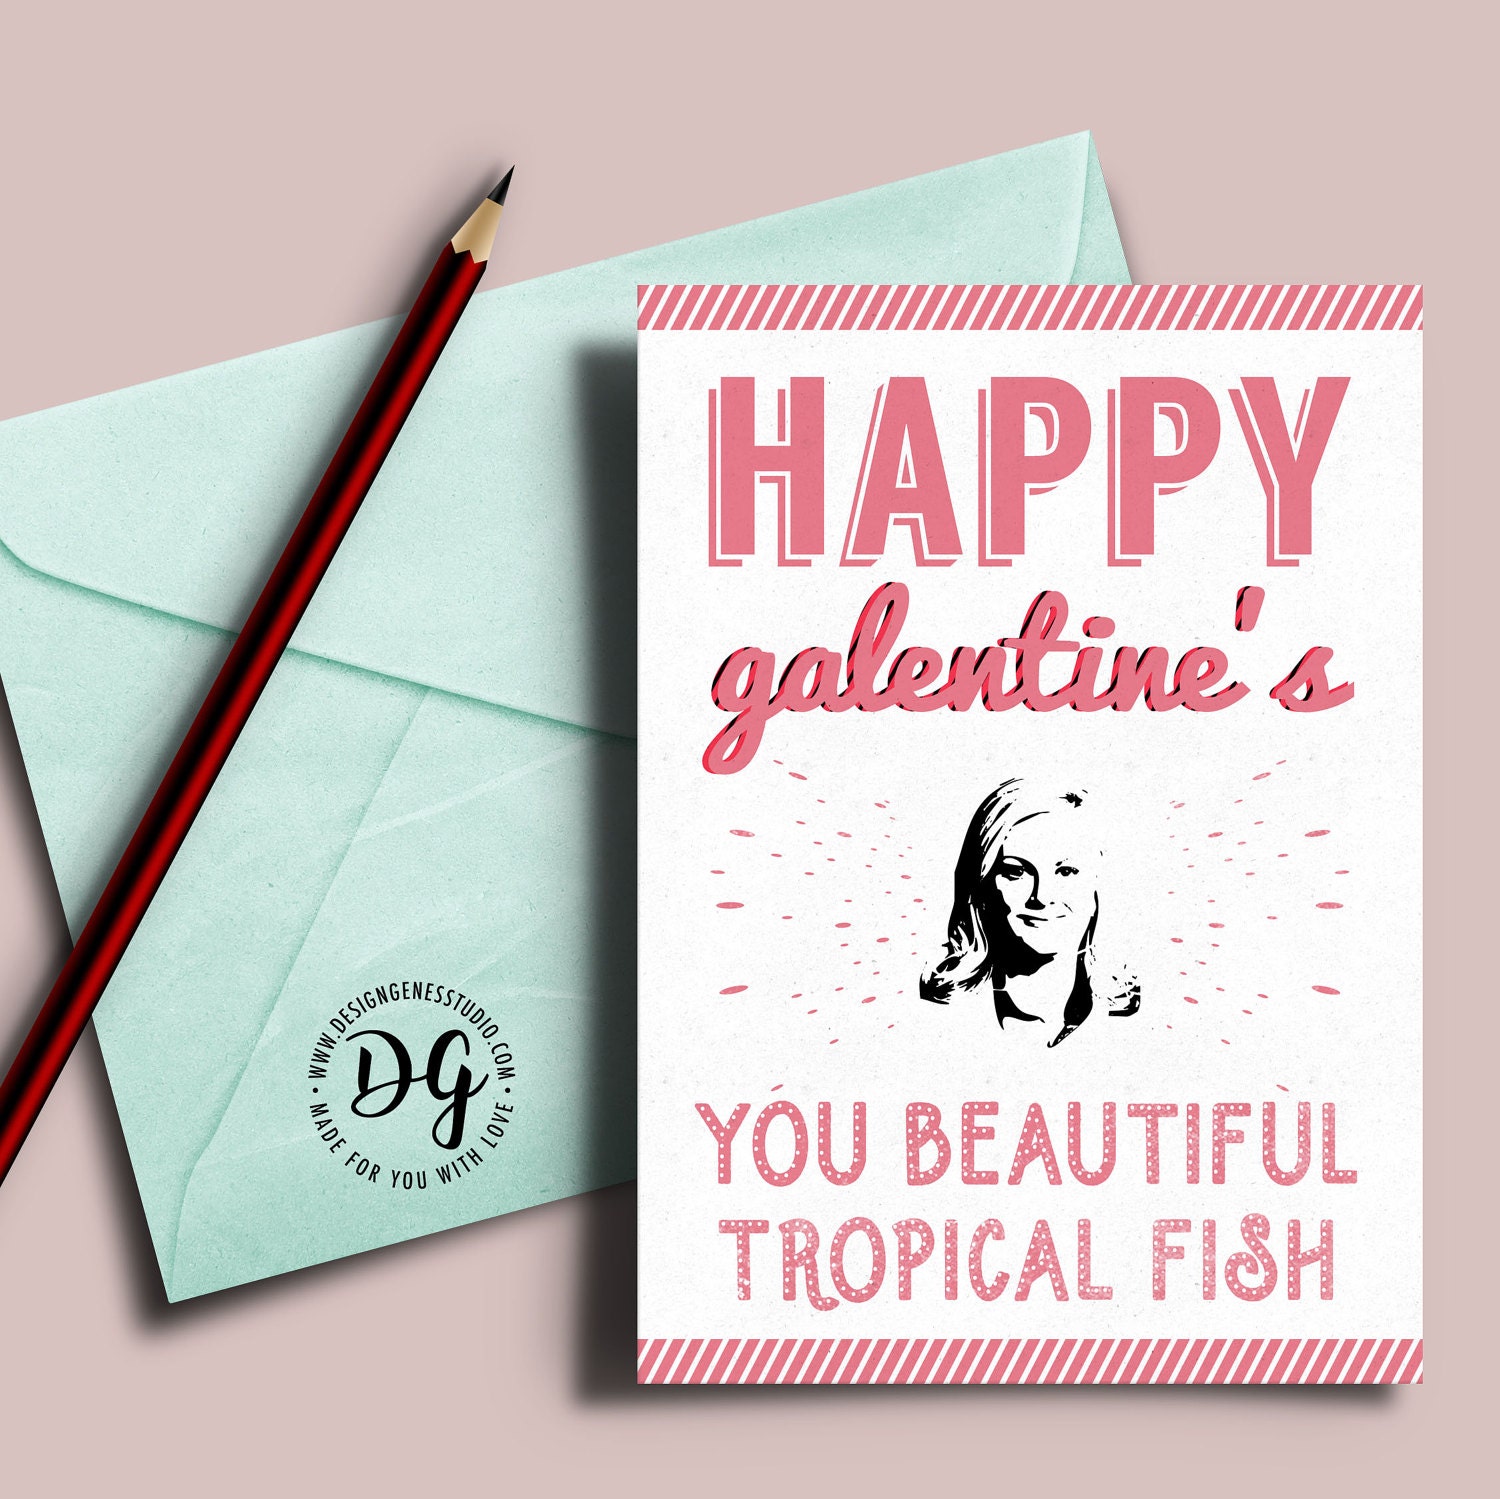 Happy Galentine's day card Leslie Knope quote Happy